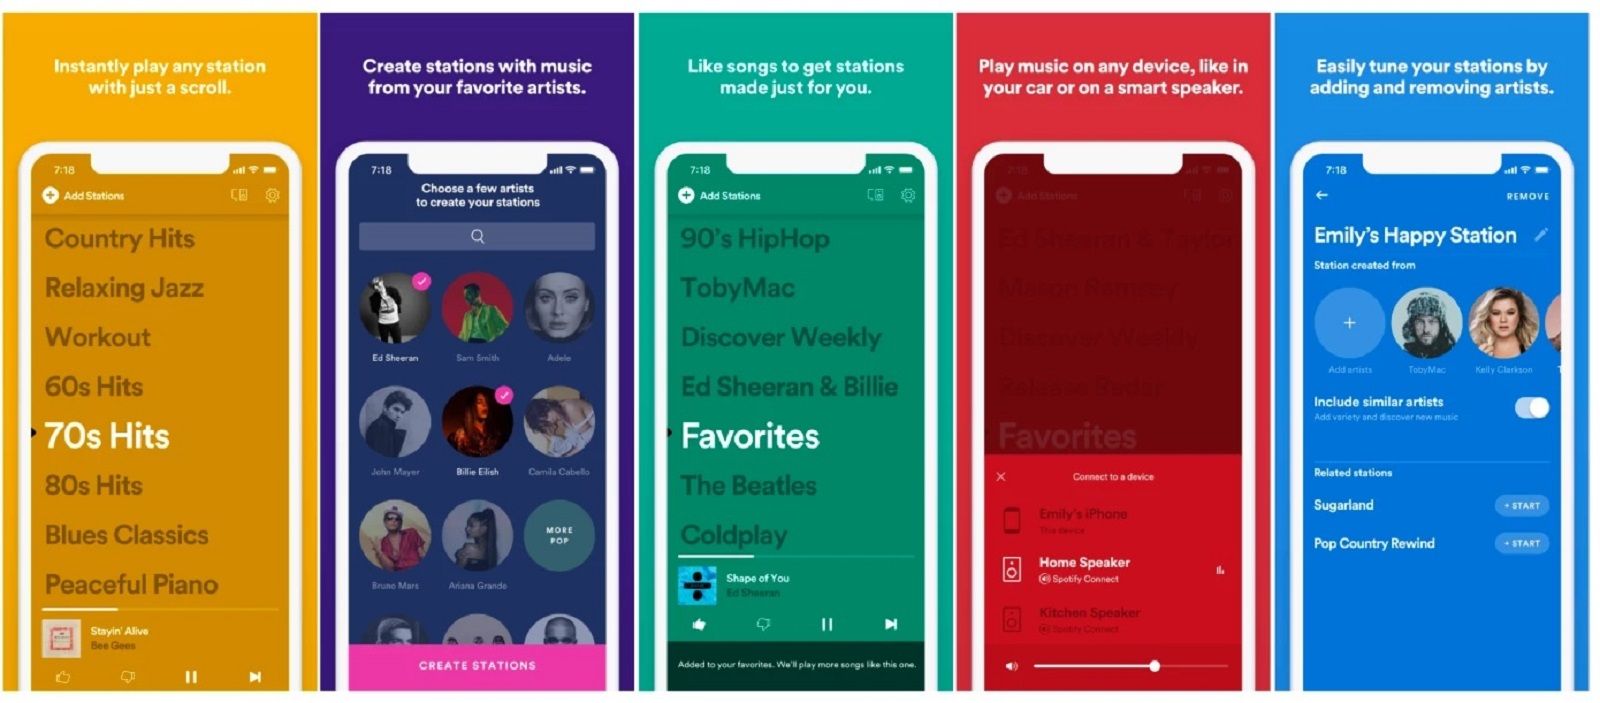 Spotify Launches A Lightweight Listening App Called Stations image 2